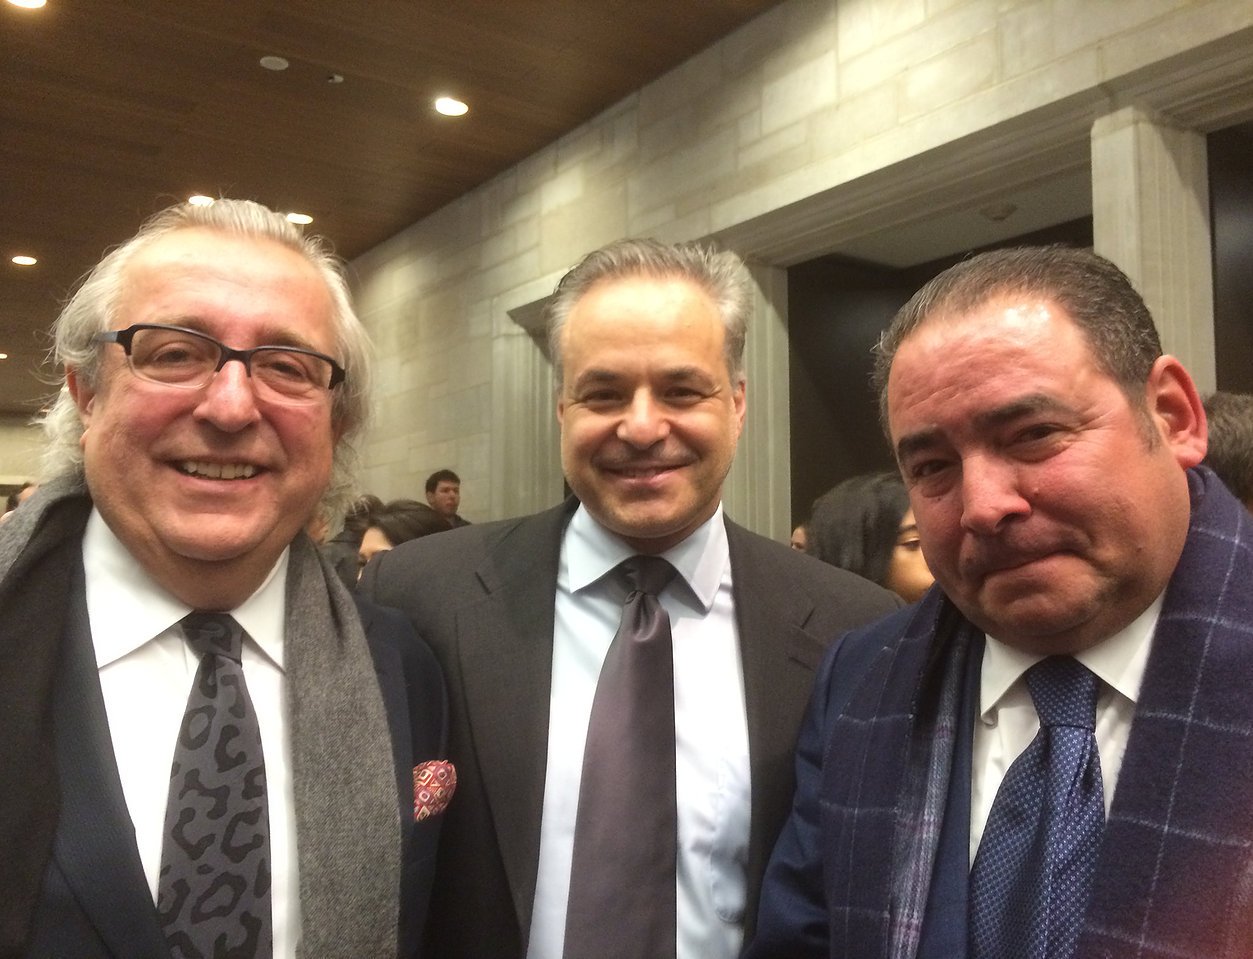 Clint Arthur with Alain Ducasse and Emeril Lagasse